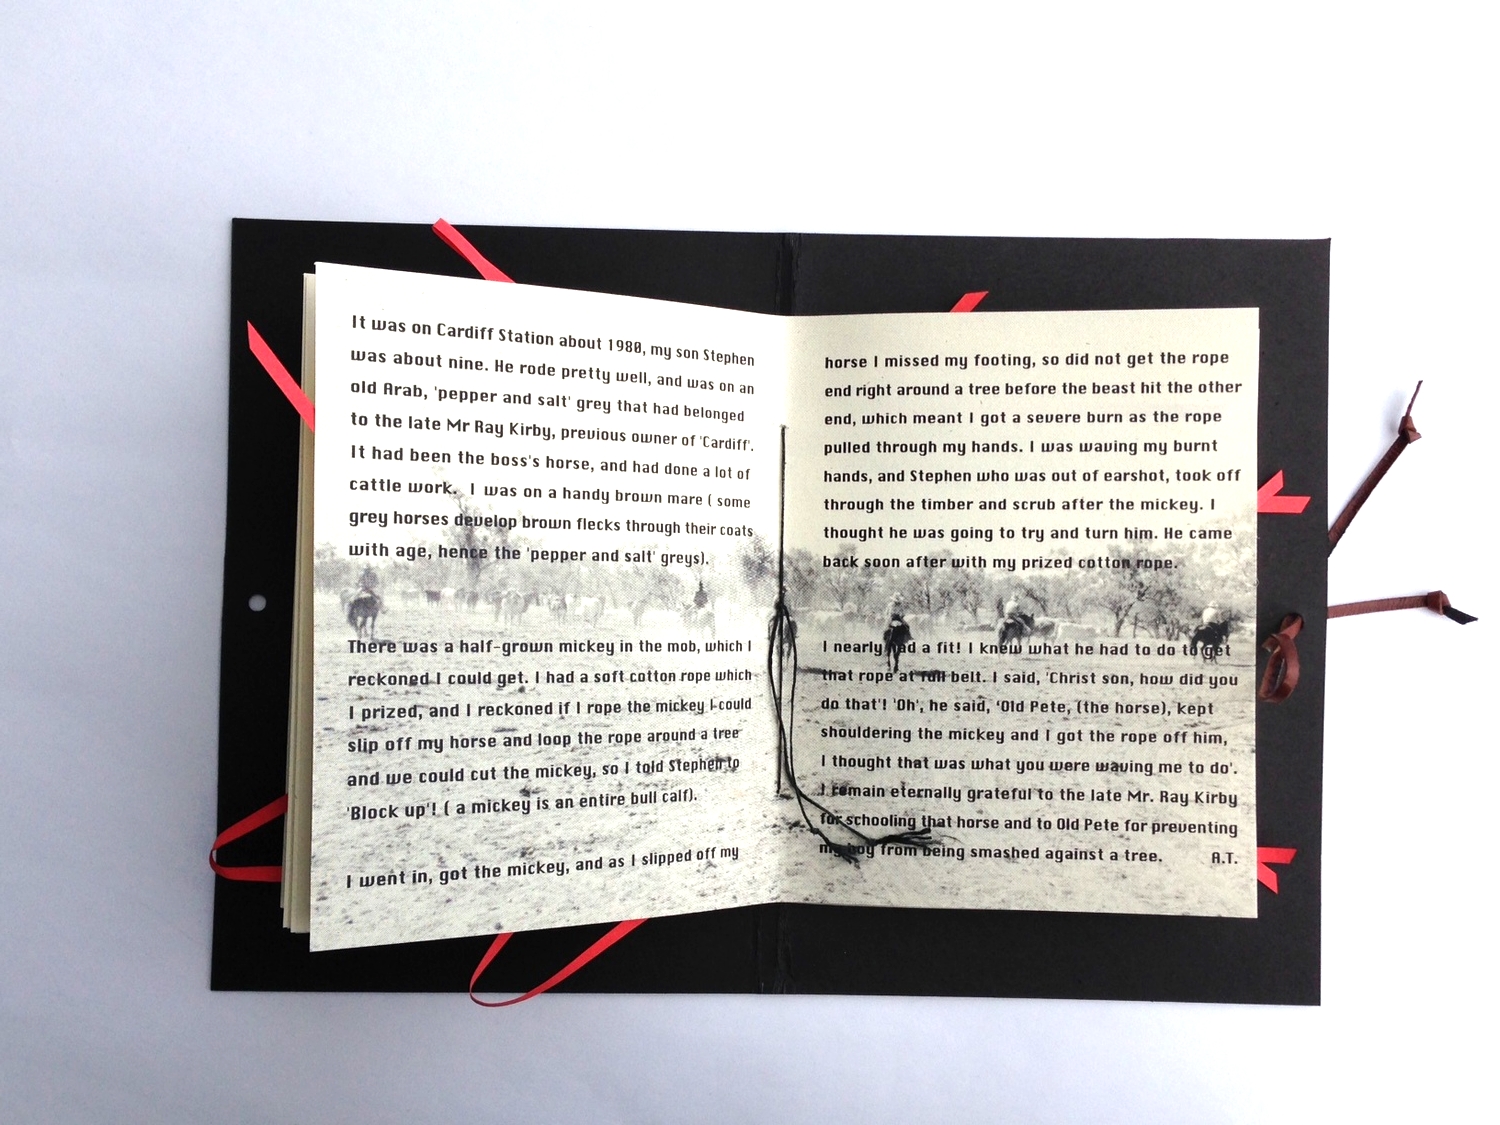    The Man From Snowy River - Revisited. &nbsp; Artists Book. 2000&nbsp; ©&nbsp; Ida Montague  The book's content is words and imagery relate&nbsp;to present day life on the land. 